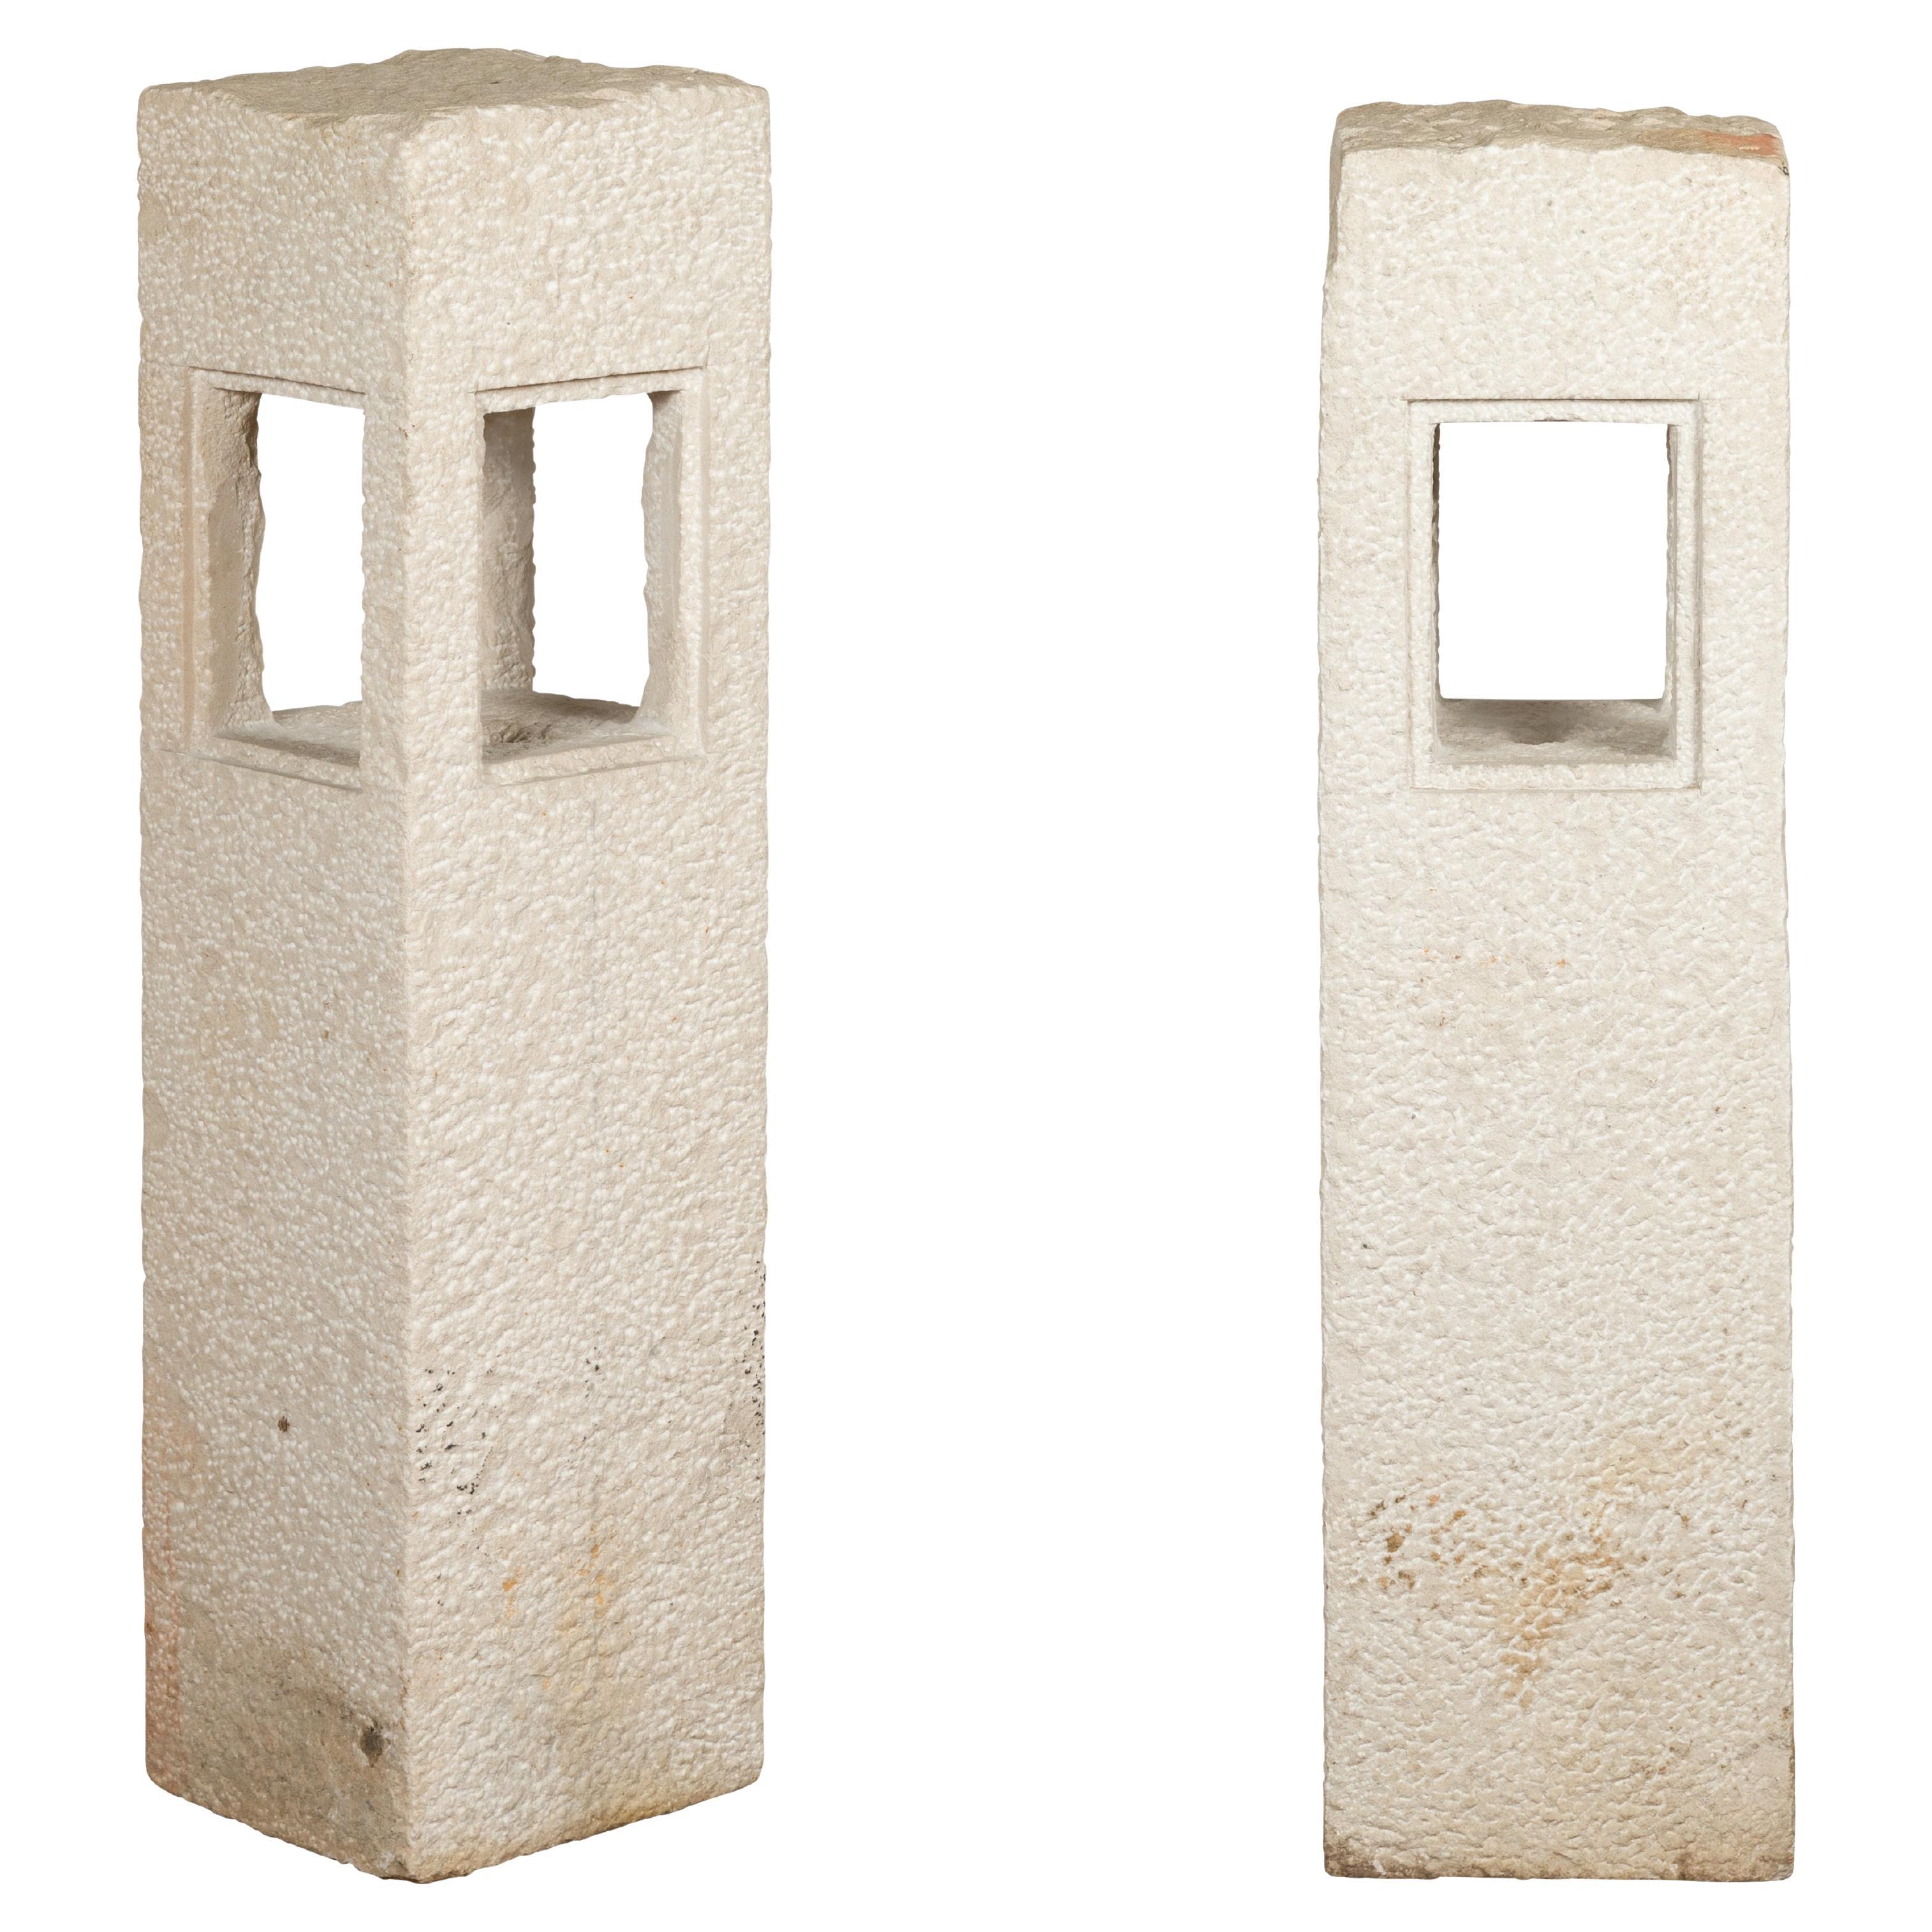 Early 20th Century Japanese Stone Tōrō Lanterns with Candle Opening and Groove For Sale